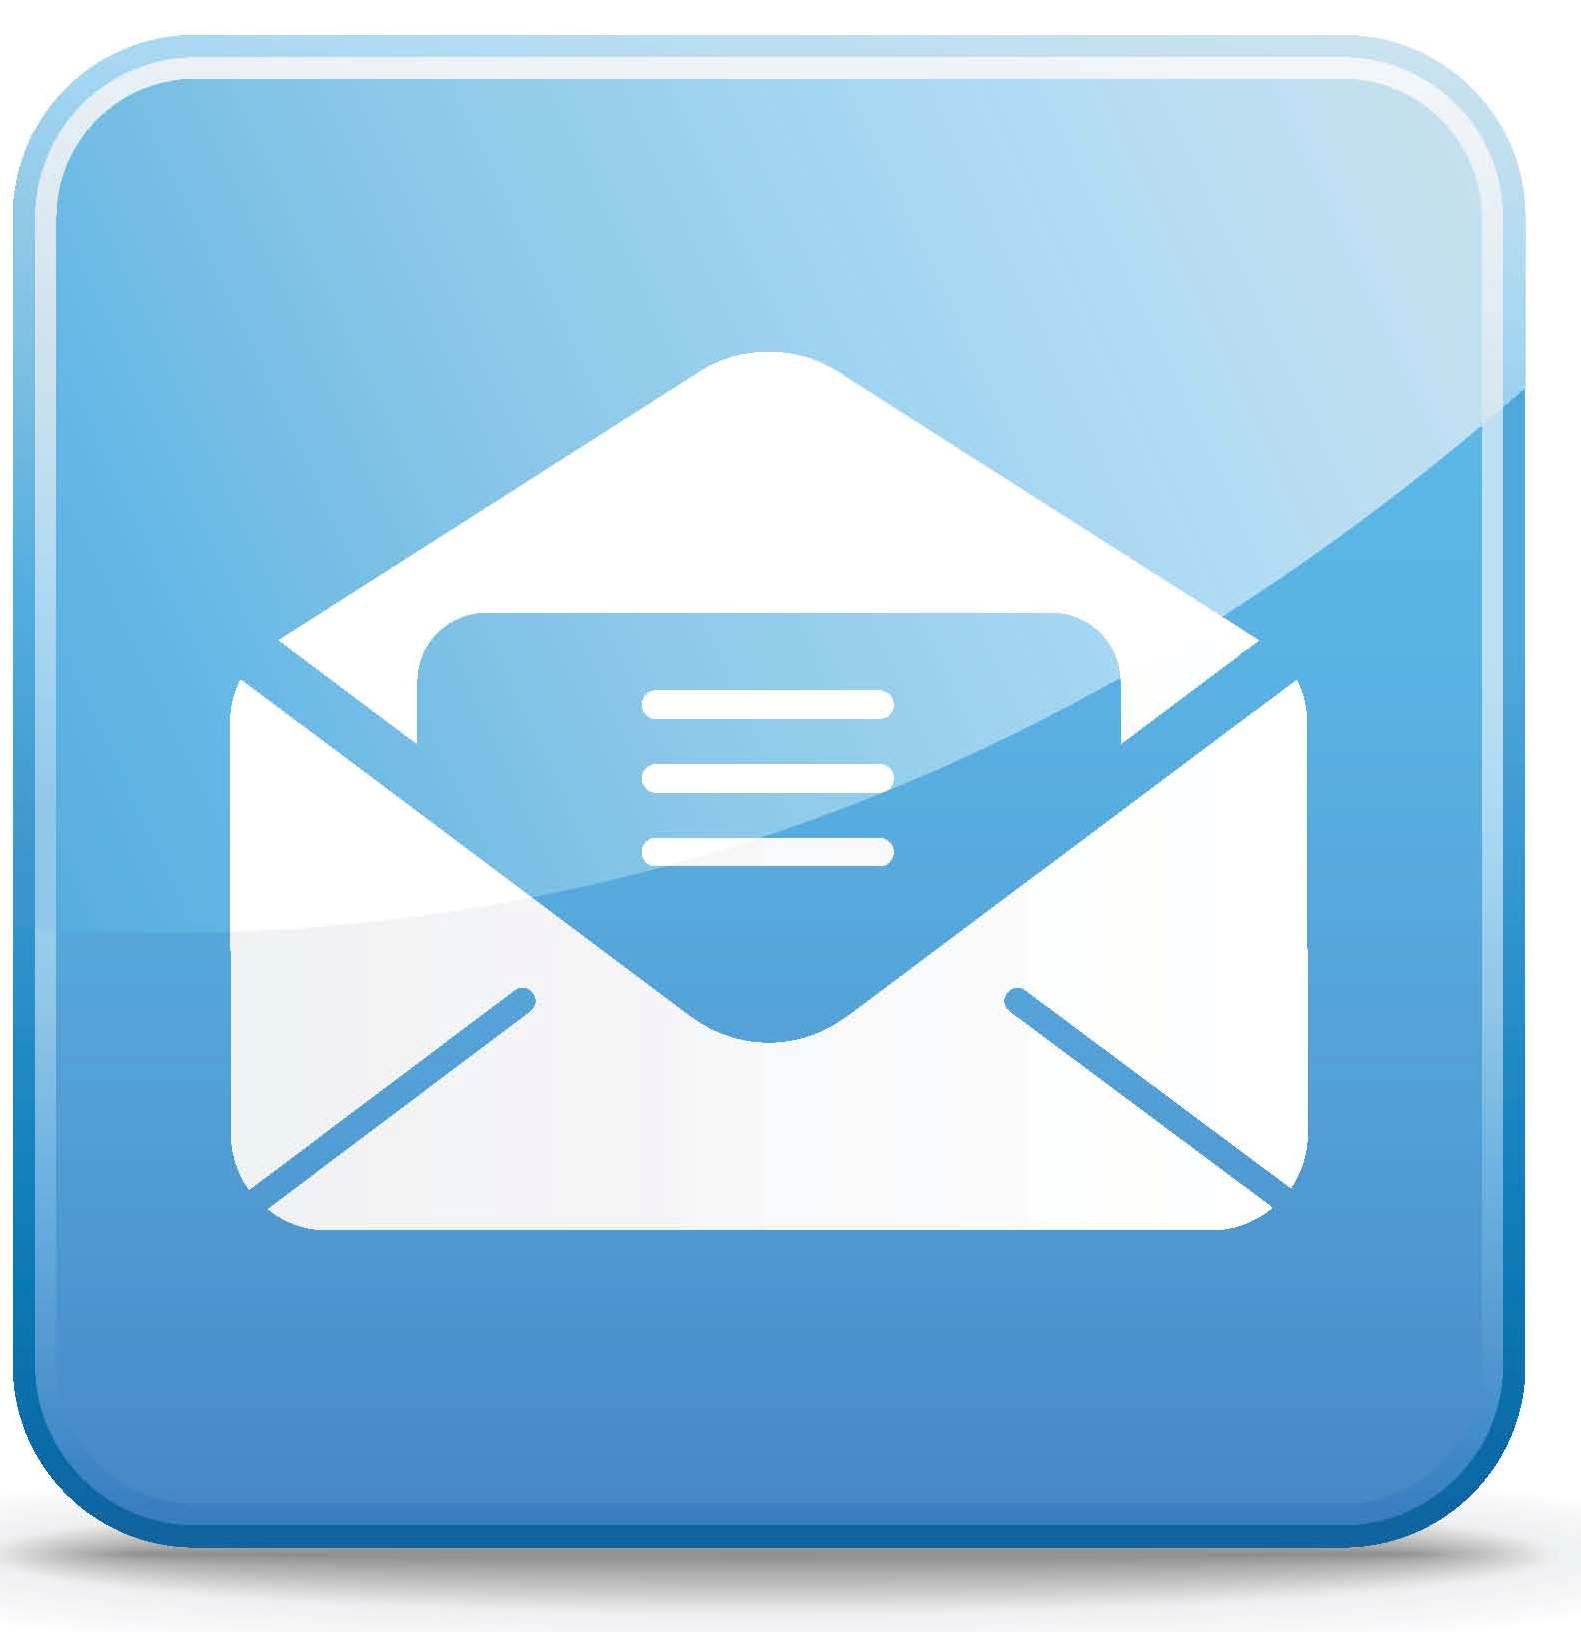 Email Icon with Transparent Background